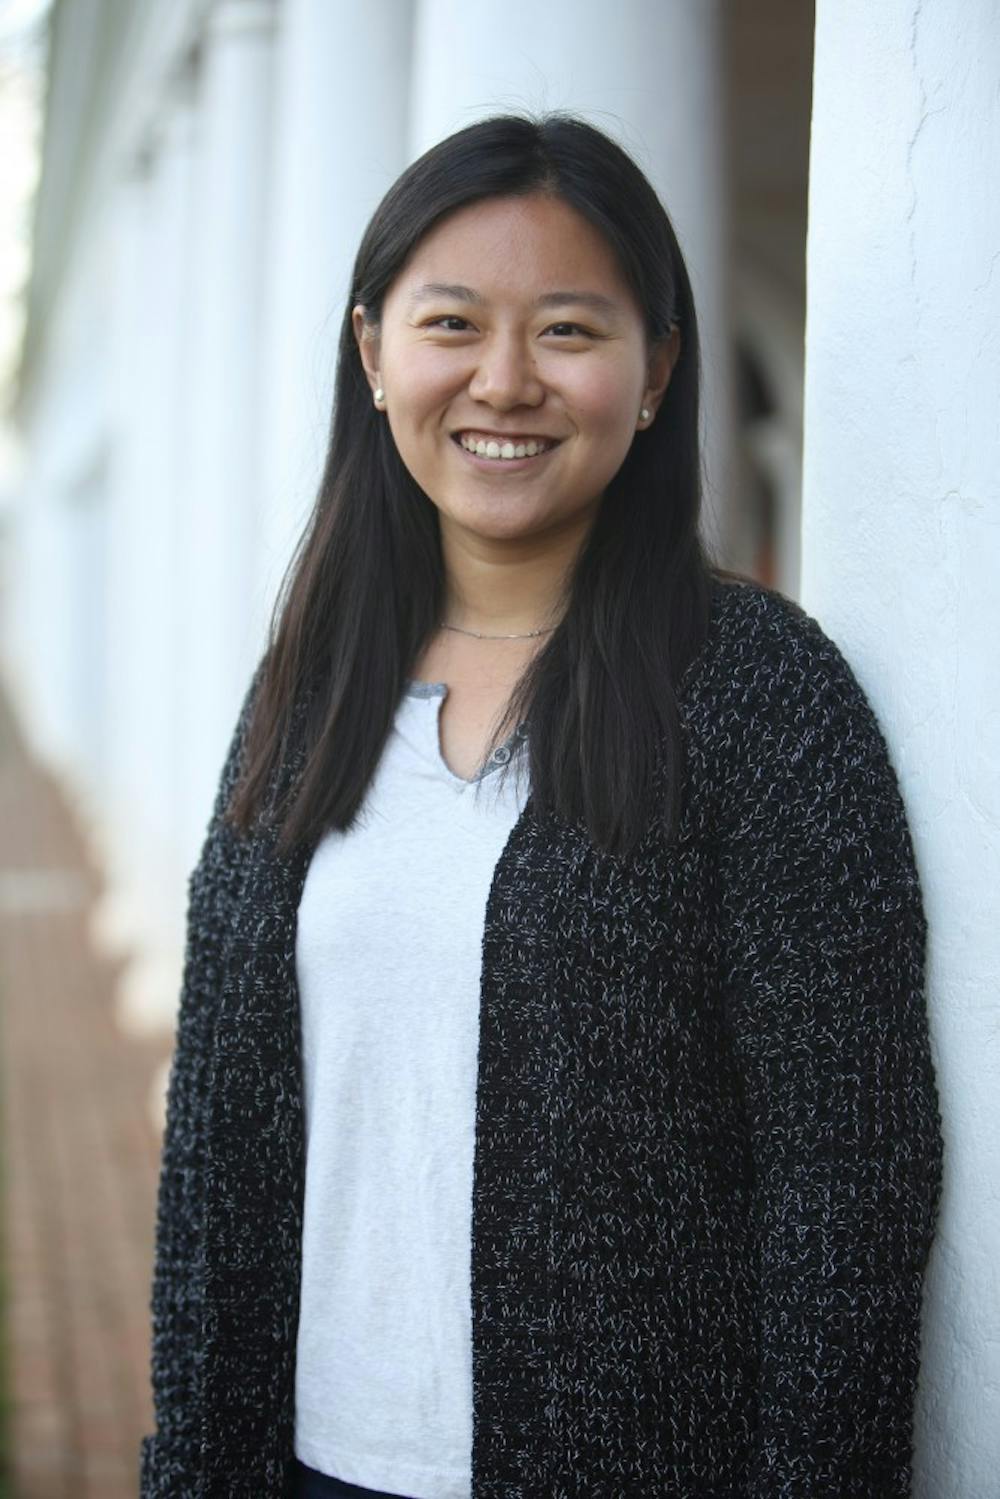 <p><em style="background-color: initial;">Daisy Xu was a Summer reporter and a News writer for the 127th term of The Cavalier Daily.</em></p>